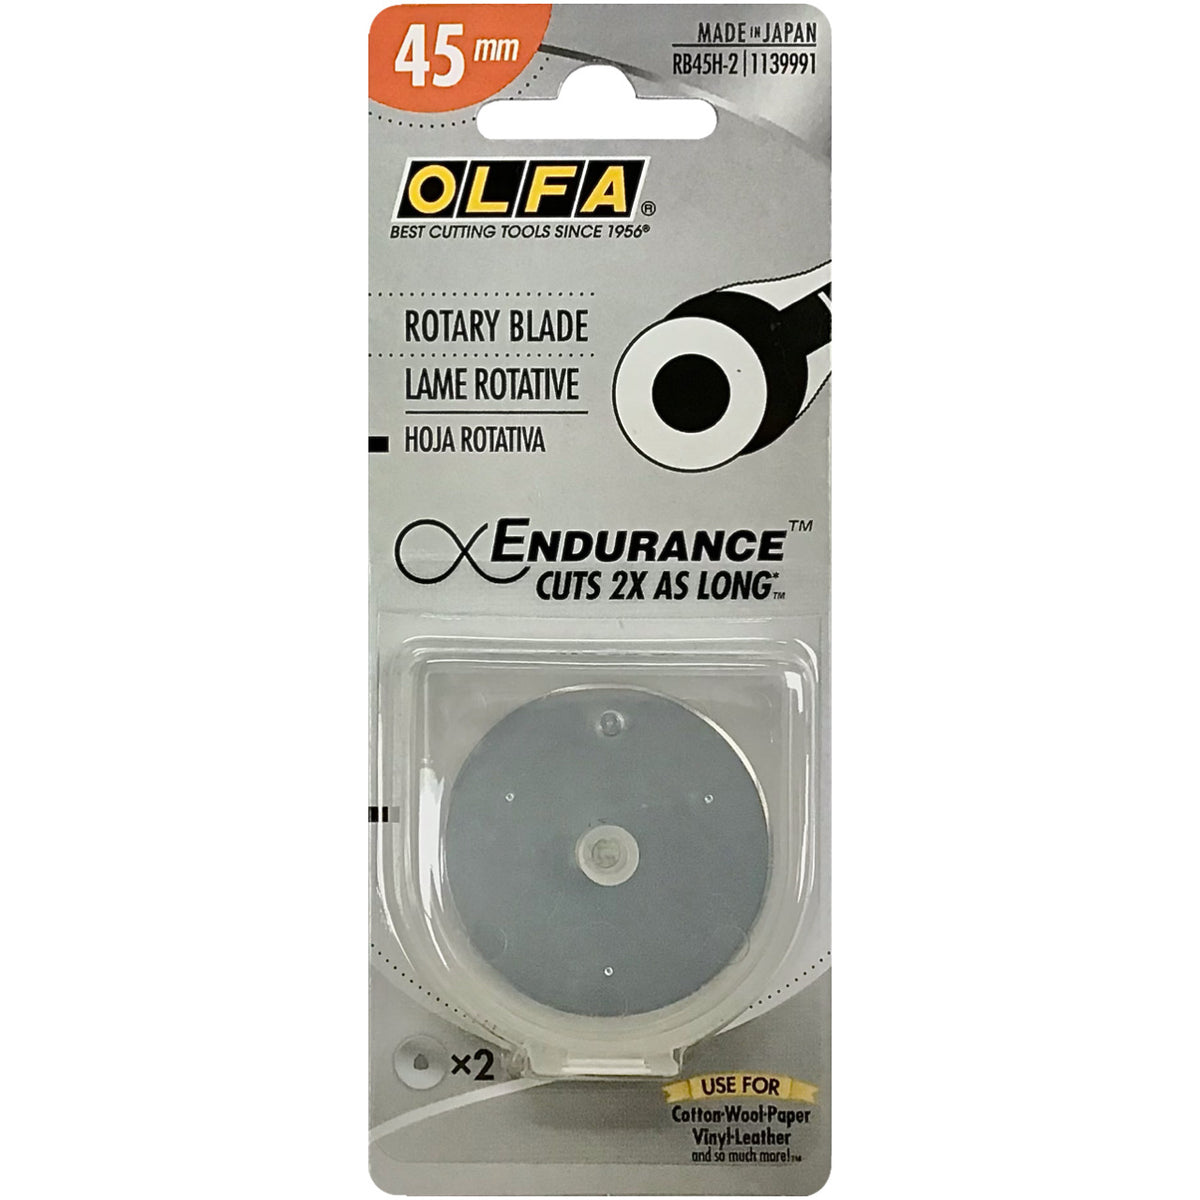 45 MM Olfa Rotary Blade – Quilted Works